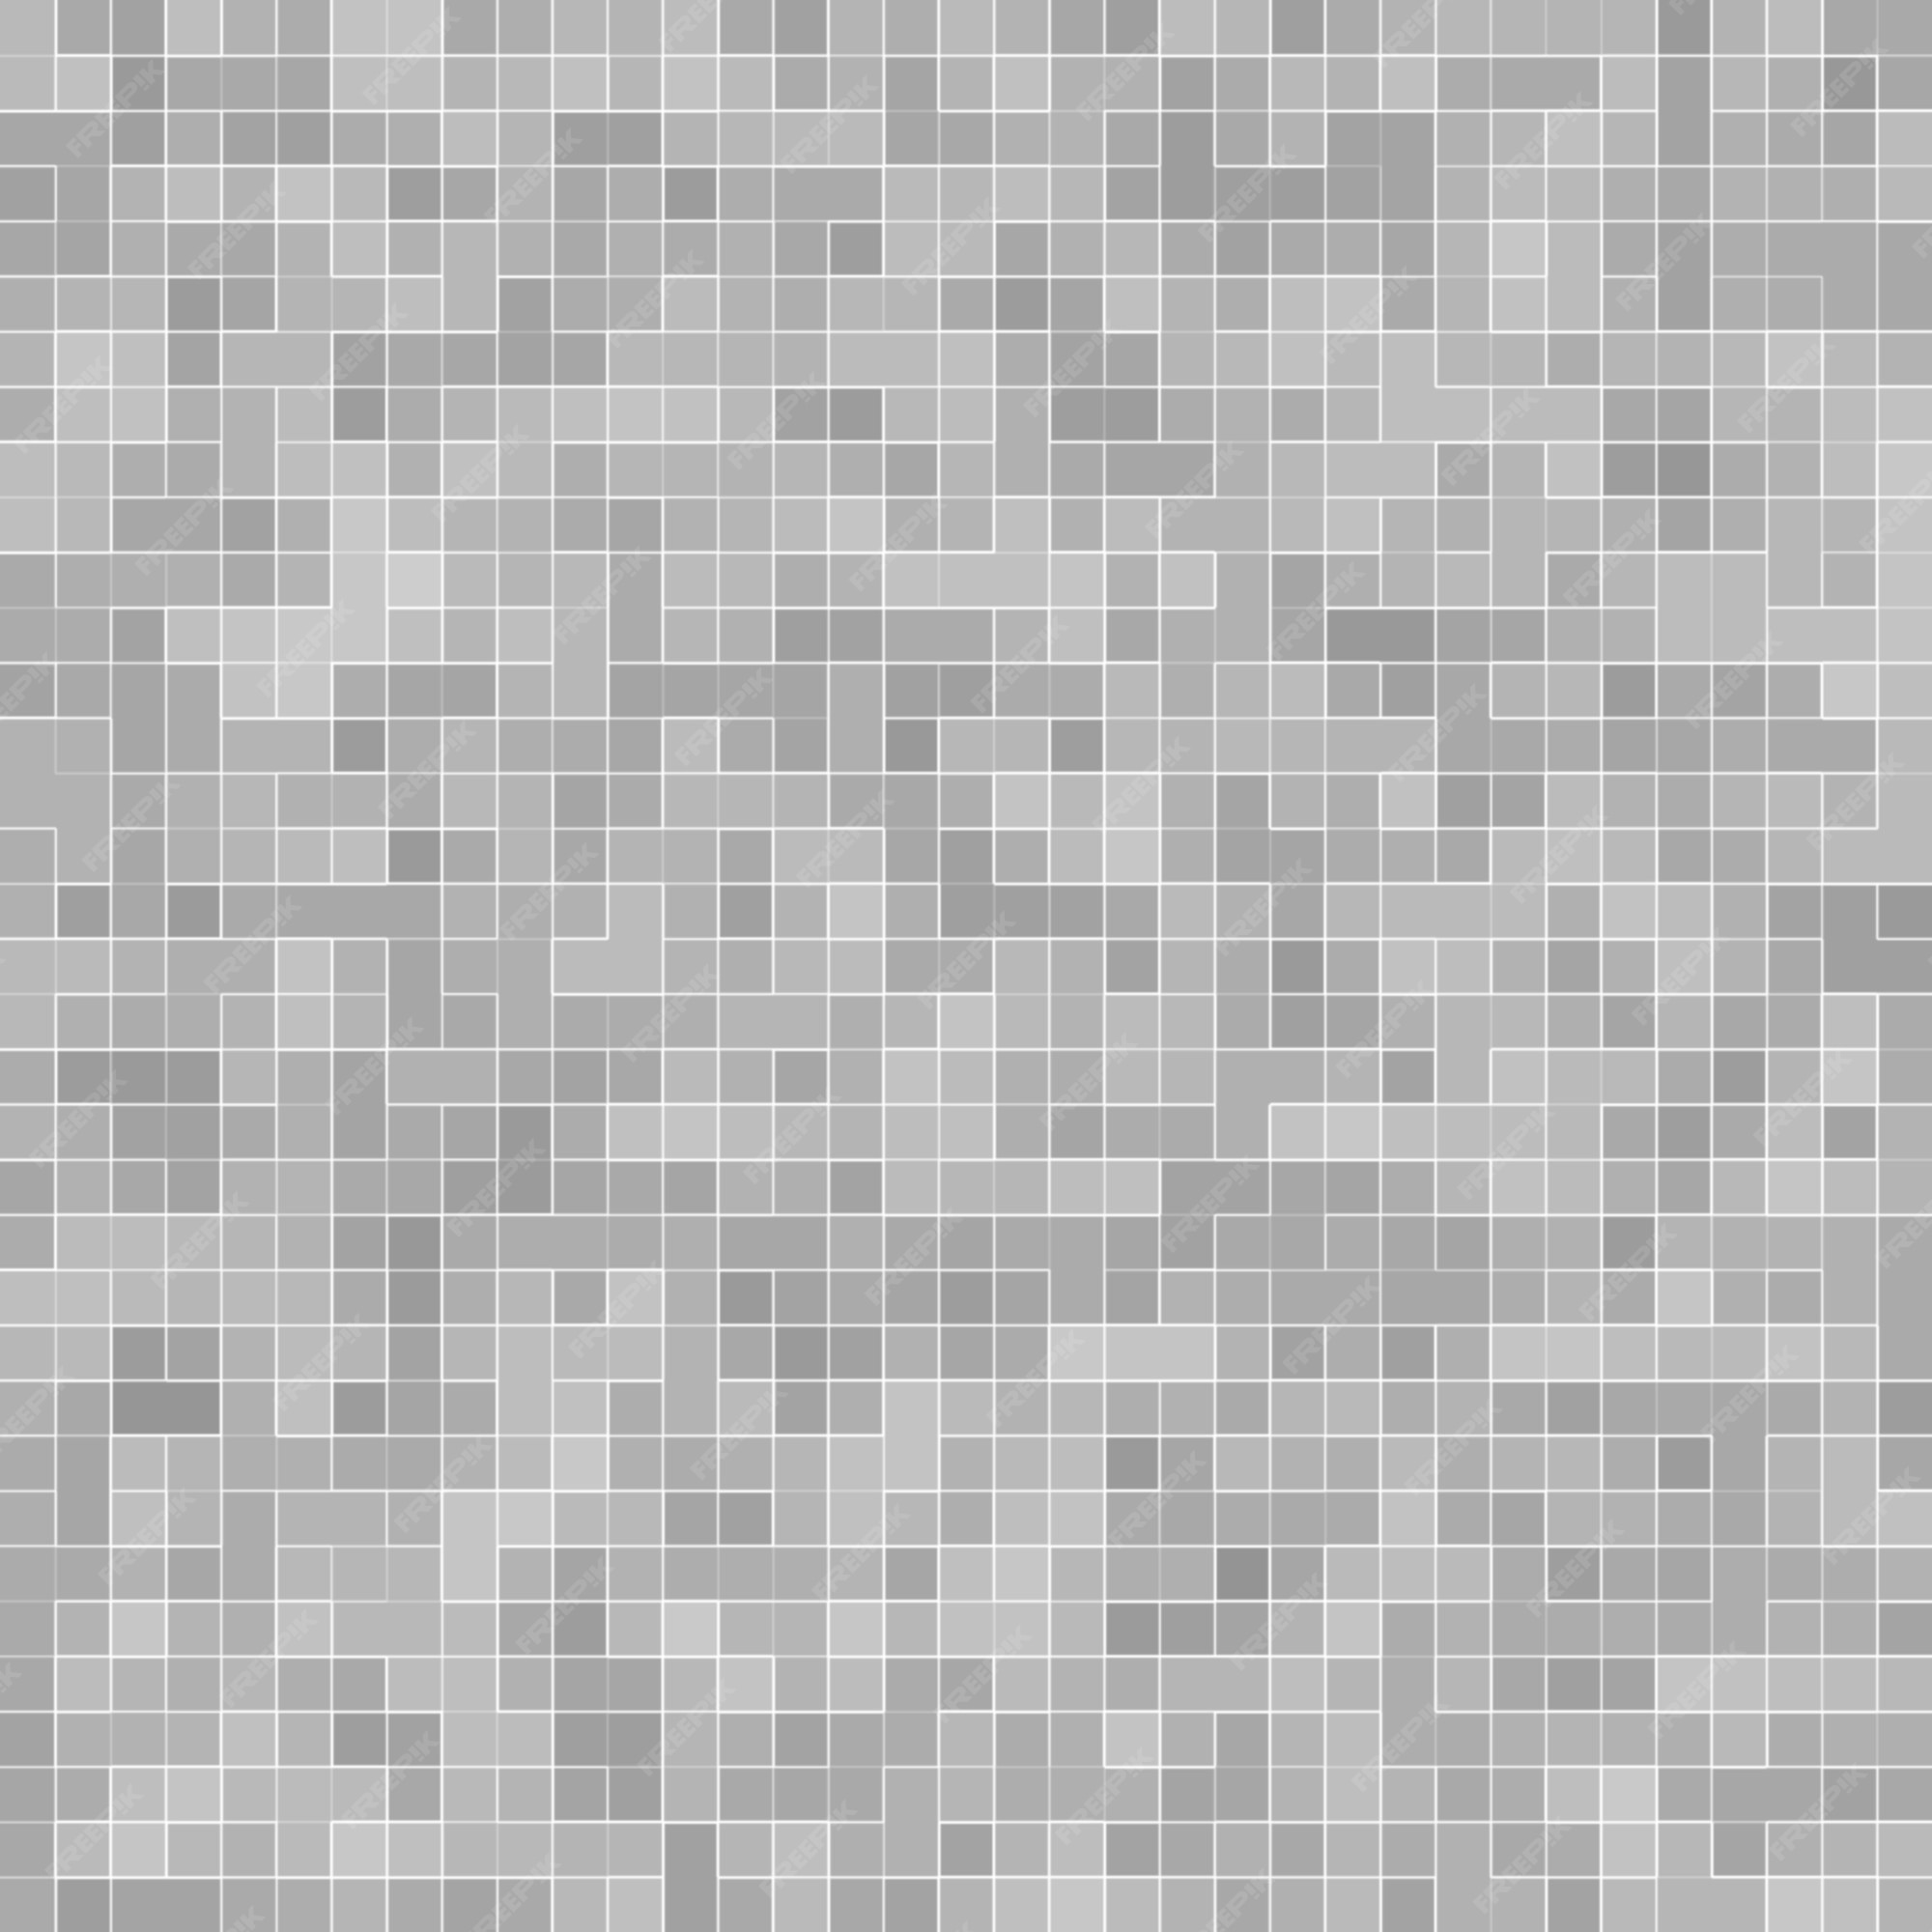 Free Photo | White and grey the tile wall high resolution wallpaper or  brick seamless and texture interior background.